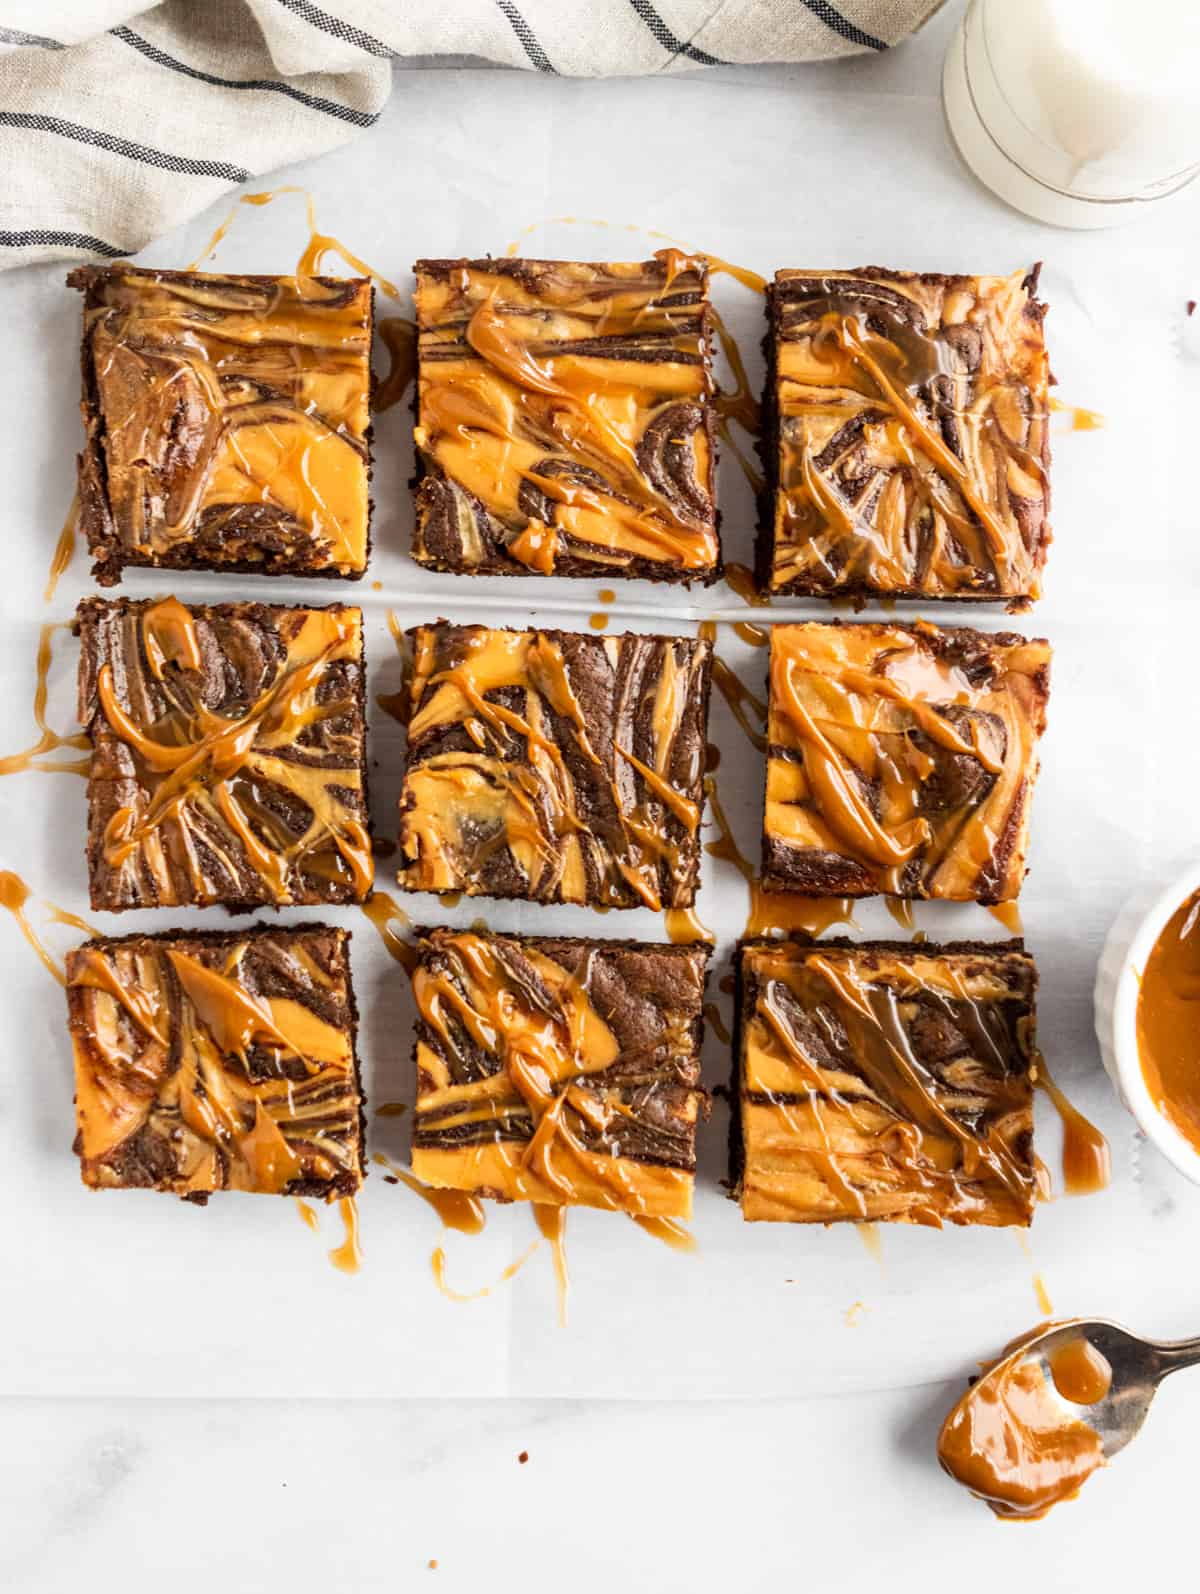 Overhead shot of sliced brownies with dulce de leche drizzle.